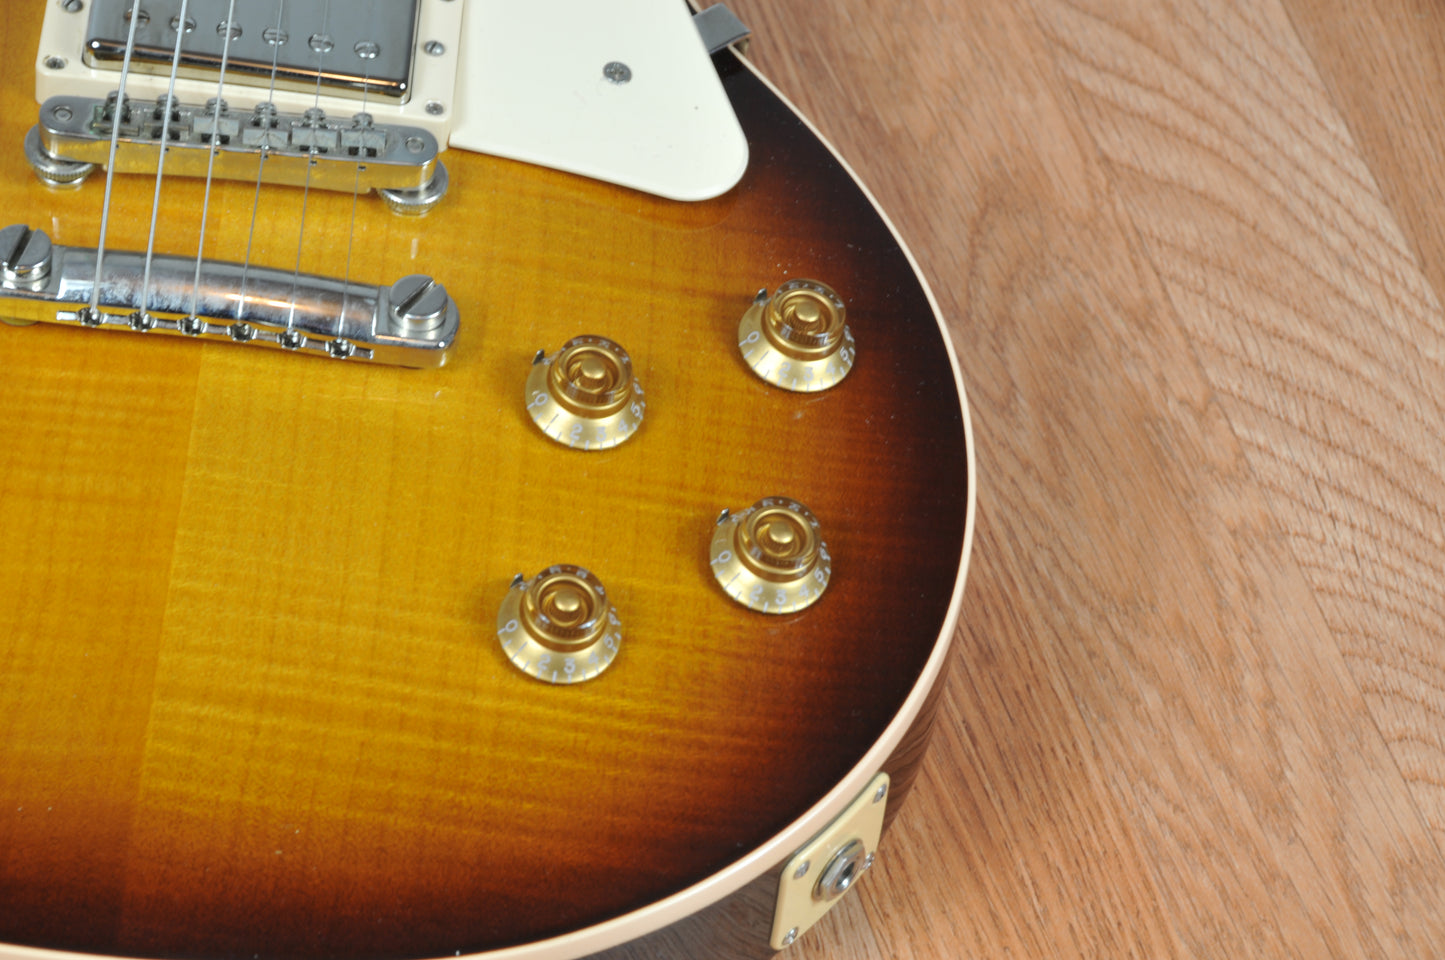 Gibson Les Paul Traditional 2018 Tobacco Burst